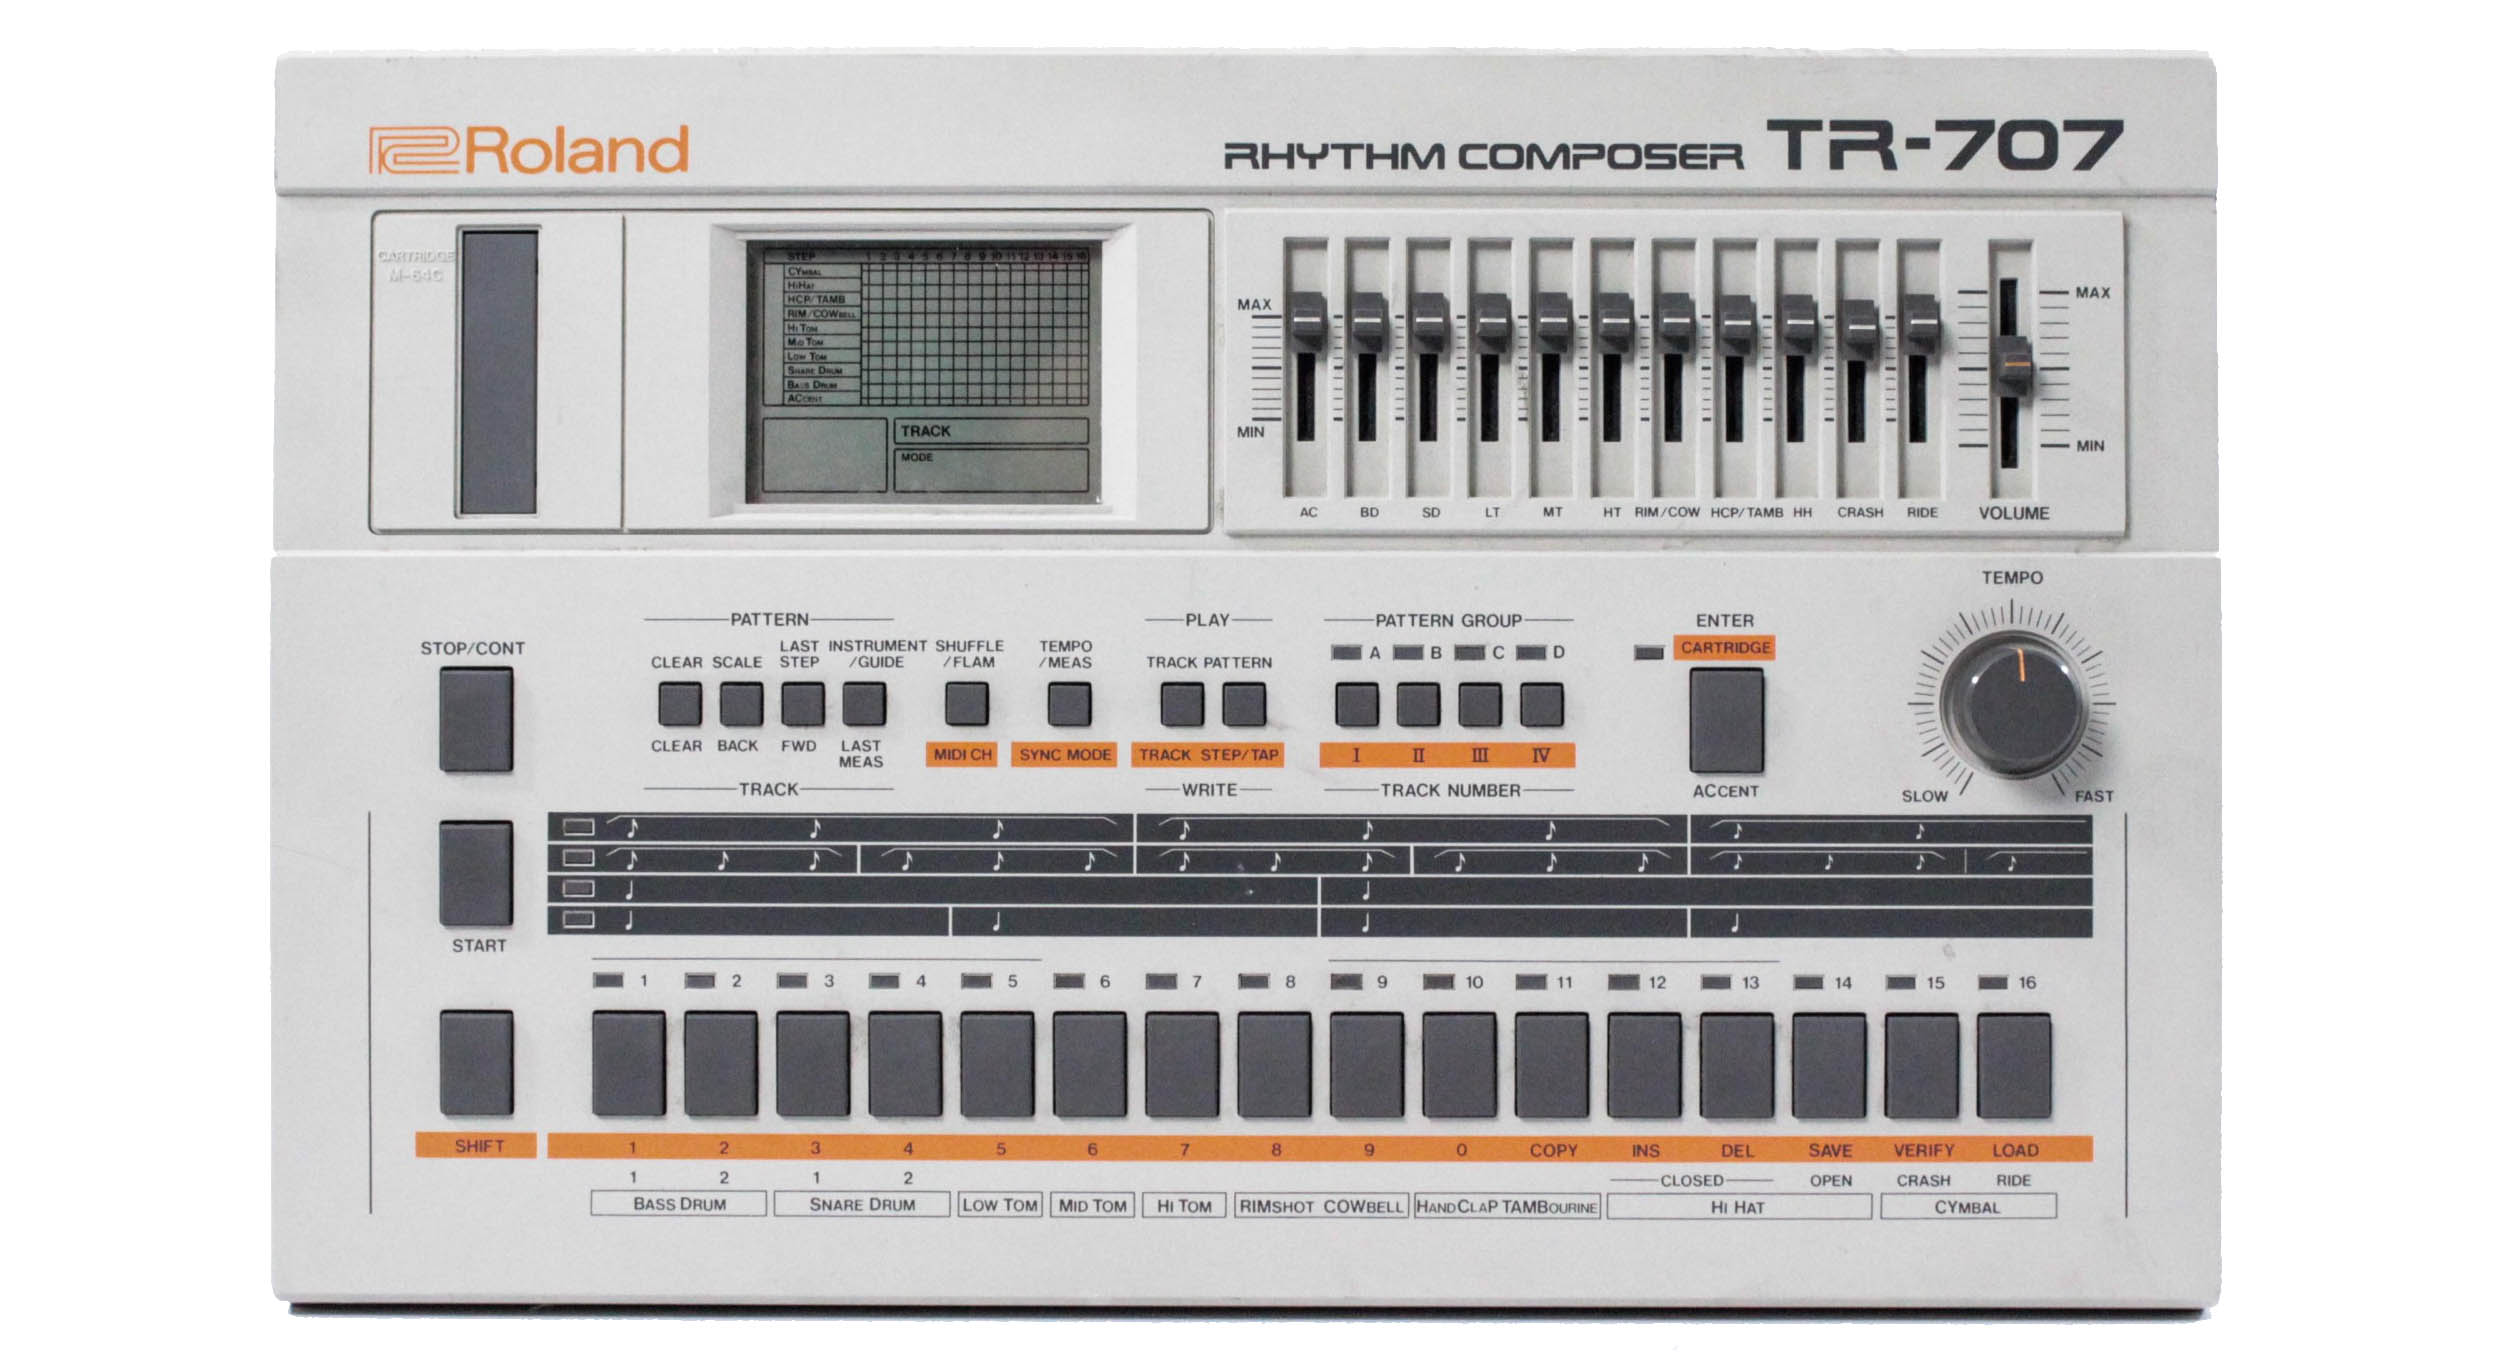 Liam's original TR-707 was given away in Red Cross charity auction